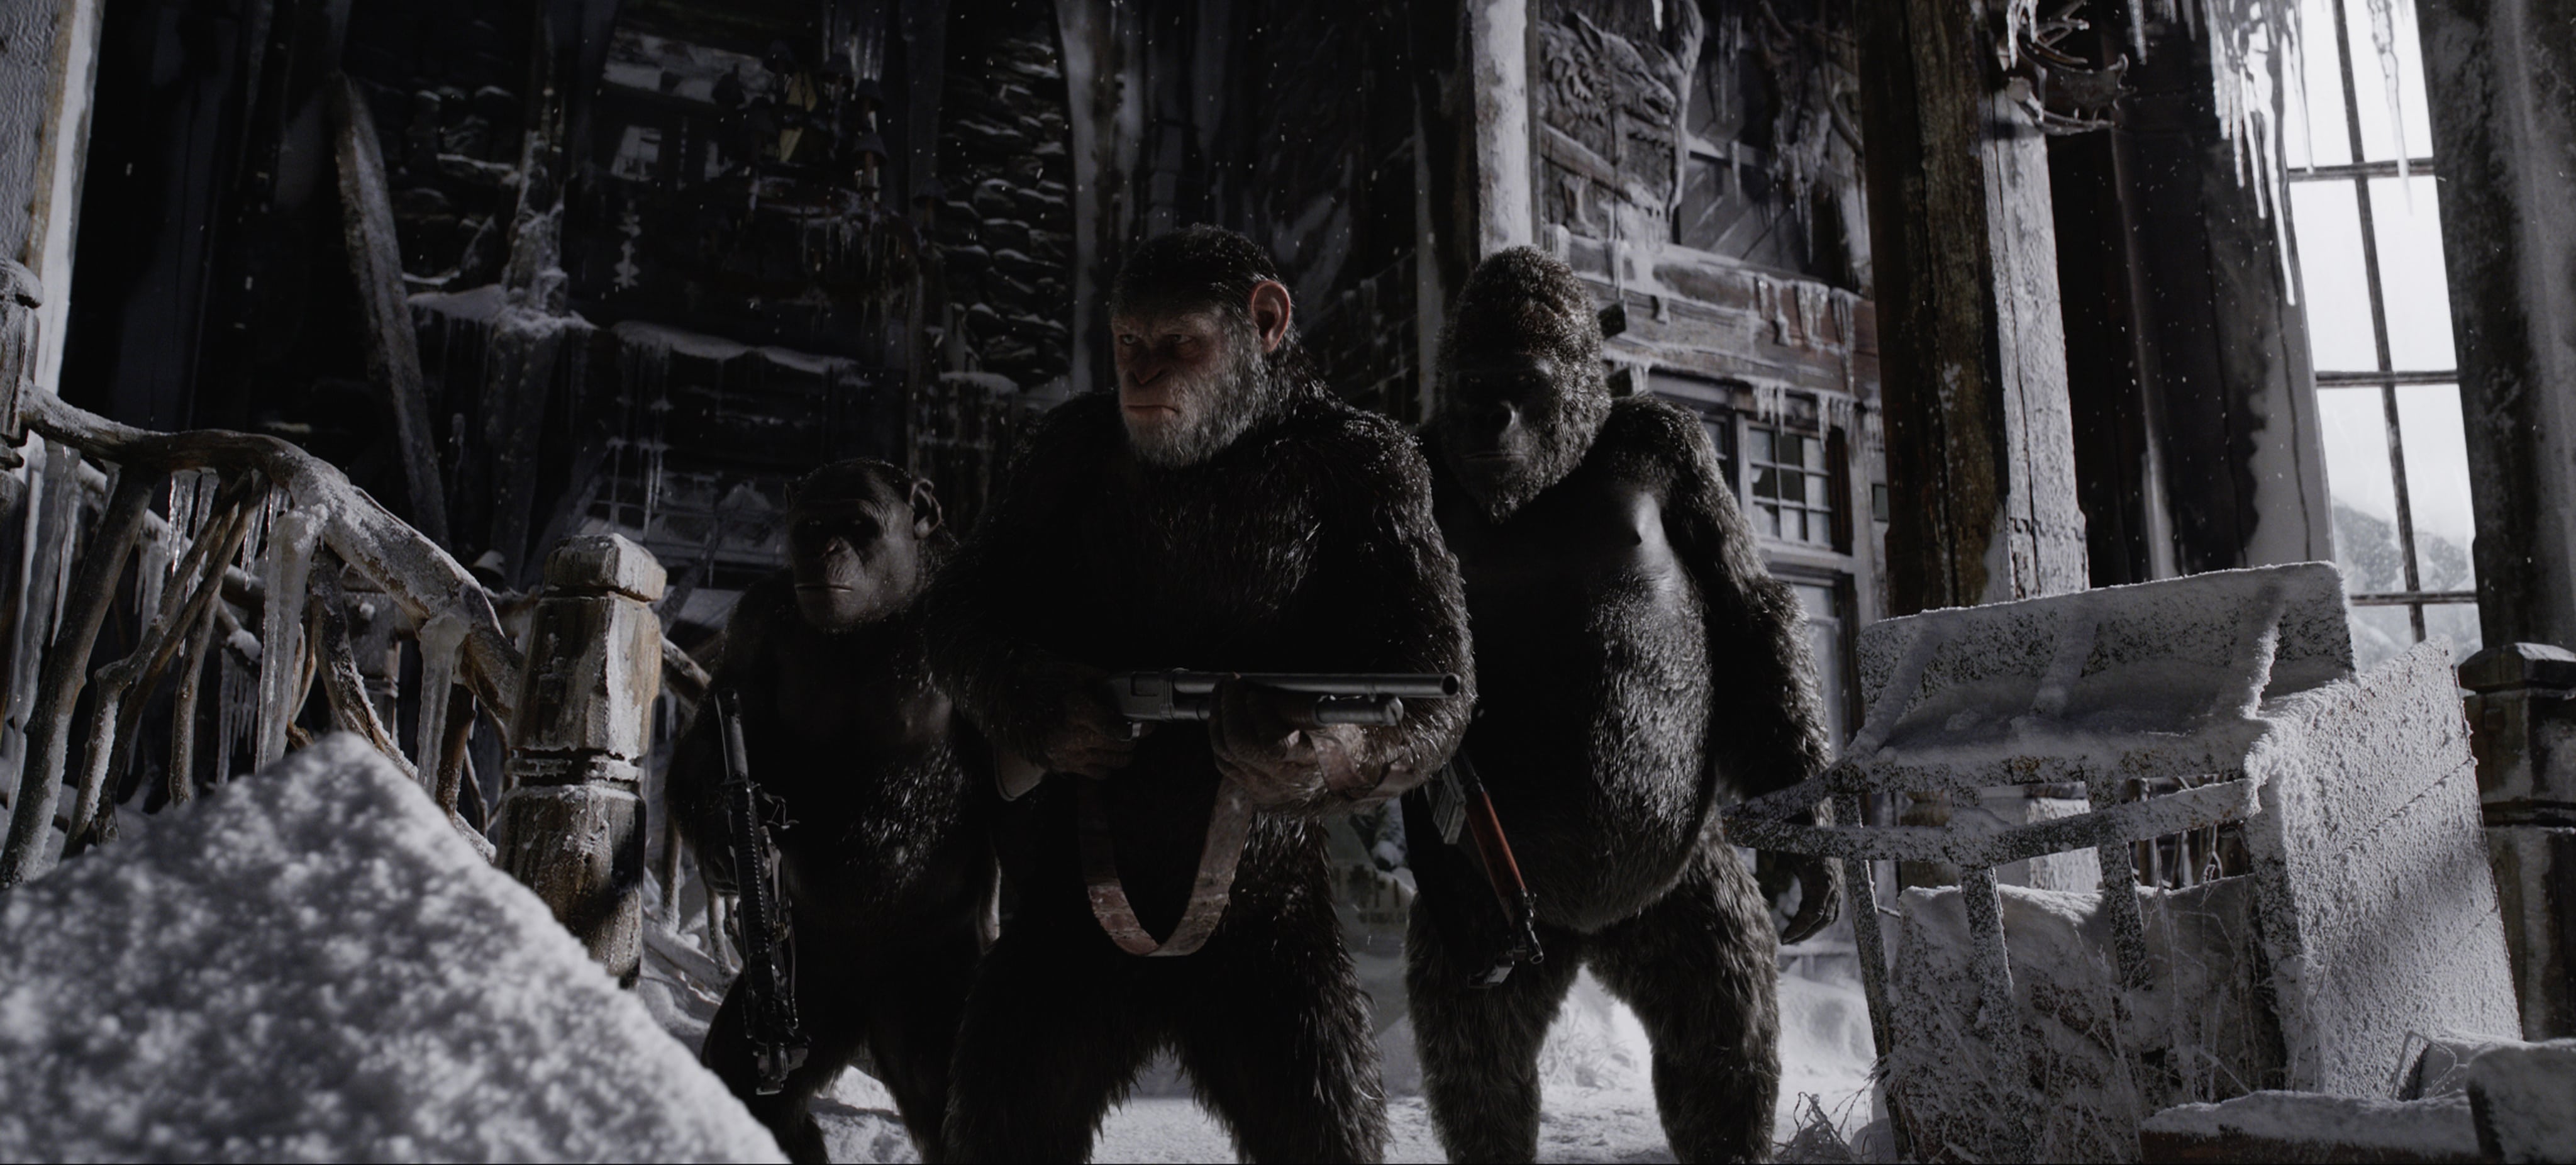 Apes with guns. Cool.